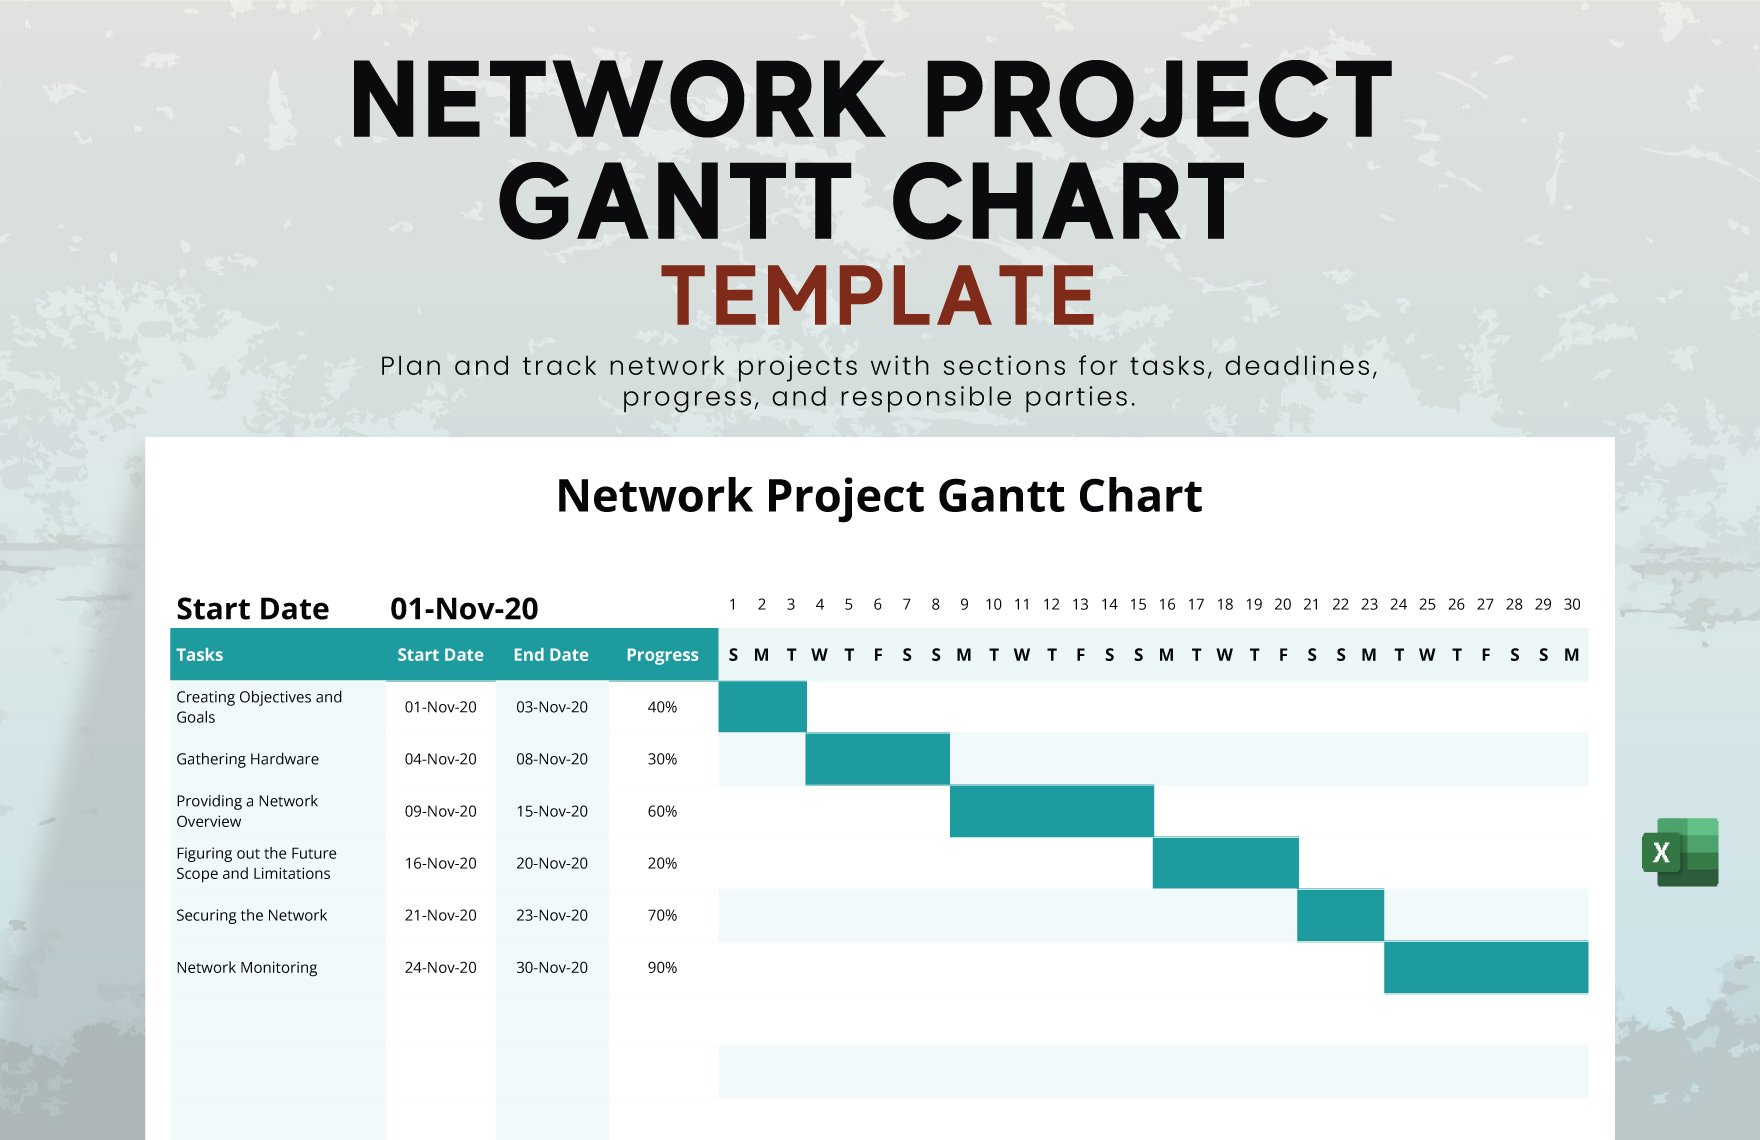 Network Project Gantt Chart Template in Excel